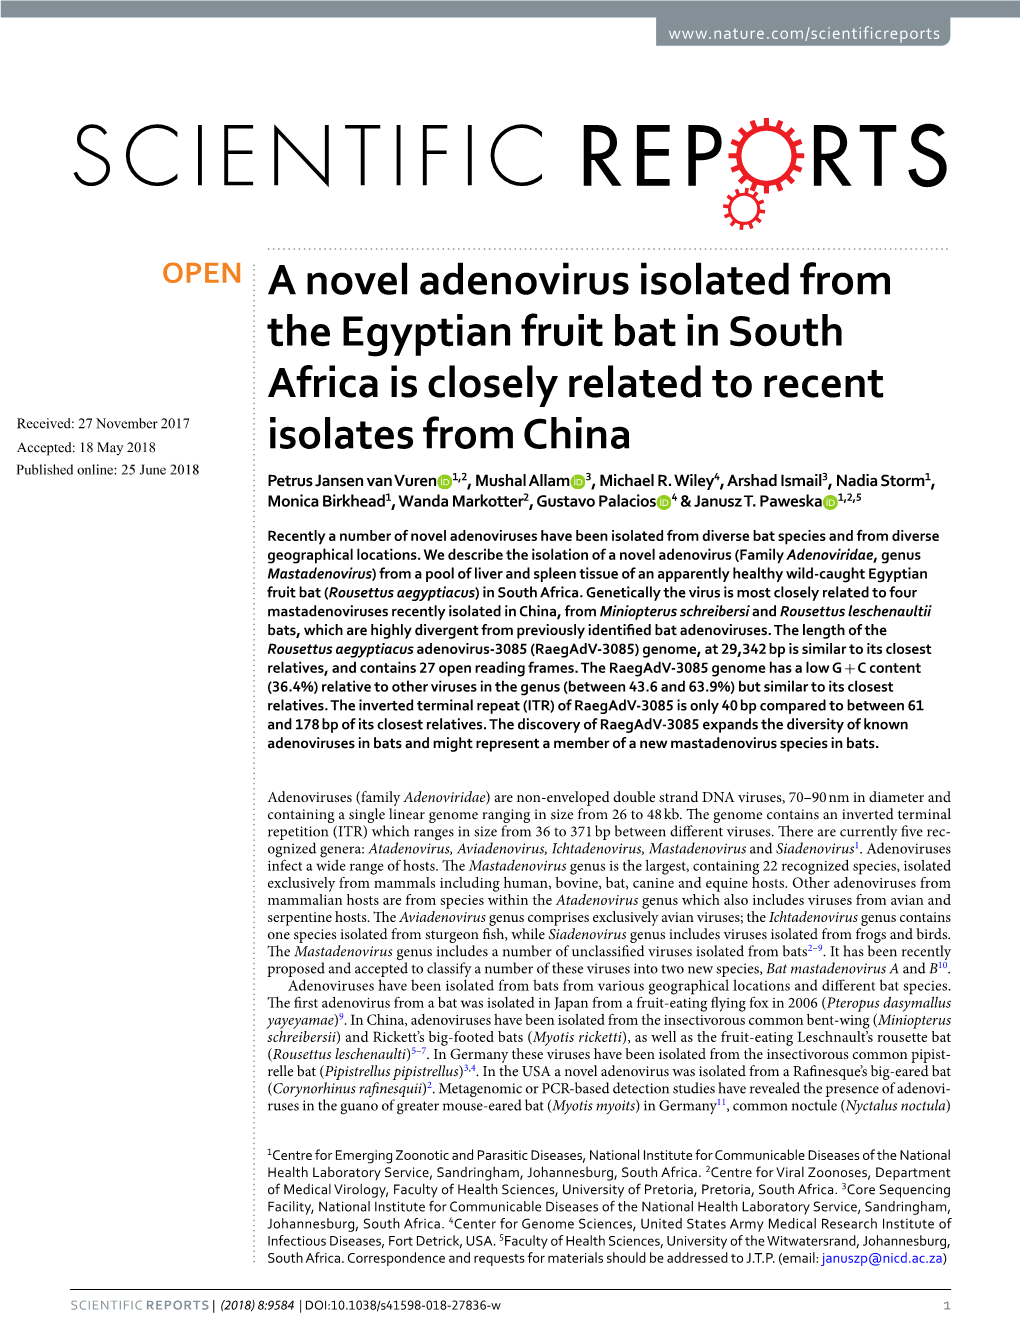 A Novel Adenovirus Isolated from the Egyptian Fruit Bat in South Africa Is